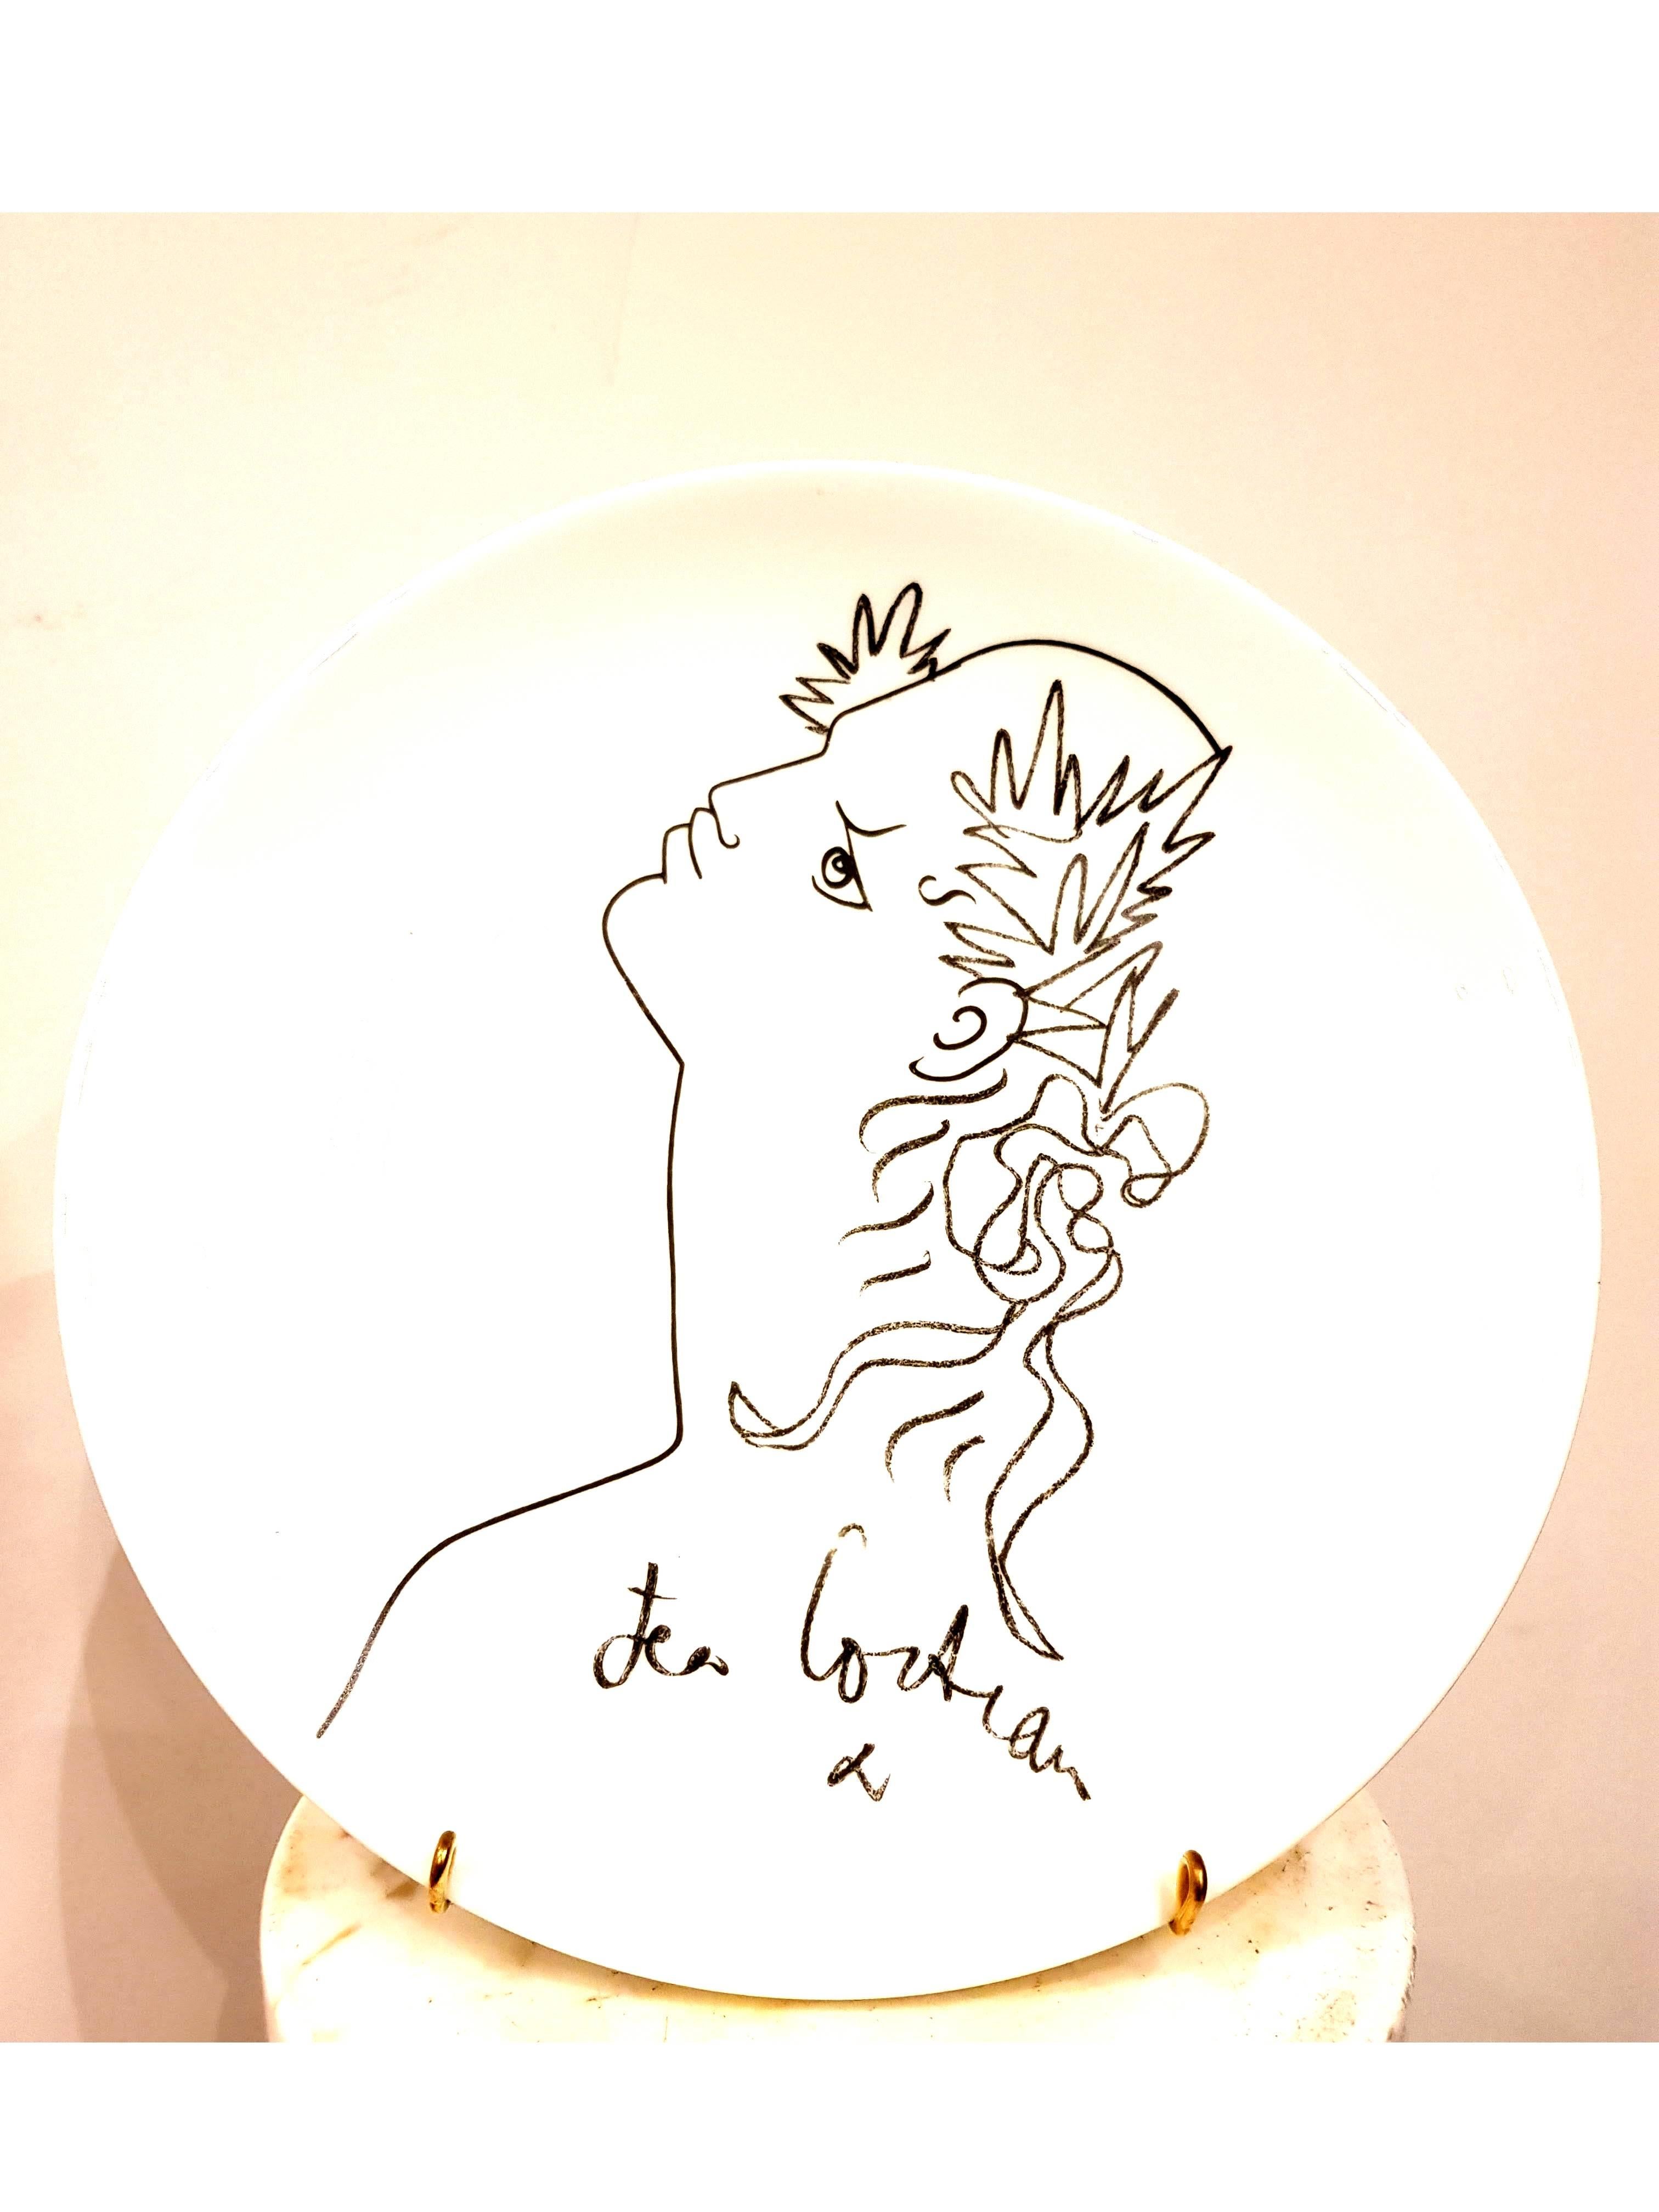  Original Limoges Porcelain Plate
Title: Profile
Signed in the plate
Dimensions: Diameter: 26 cm
Edition: 35/250 
Edited by Seta-Aubusson. 

Jean Cocteau

Writer, artist and film director Jean Cocteau was one of the most influential creative figures